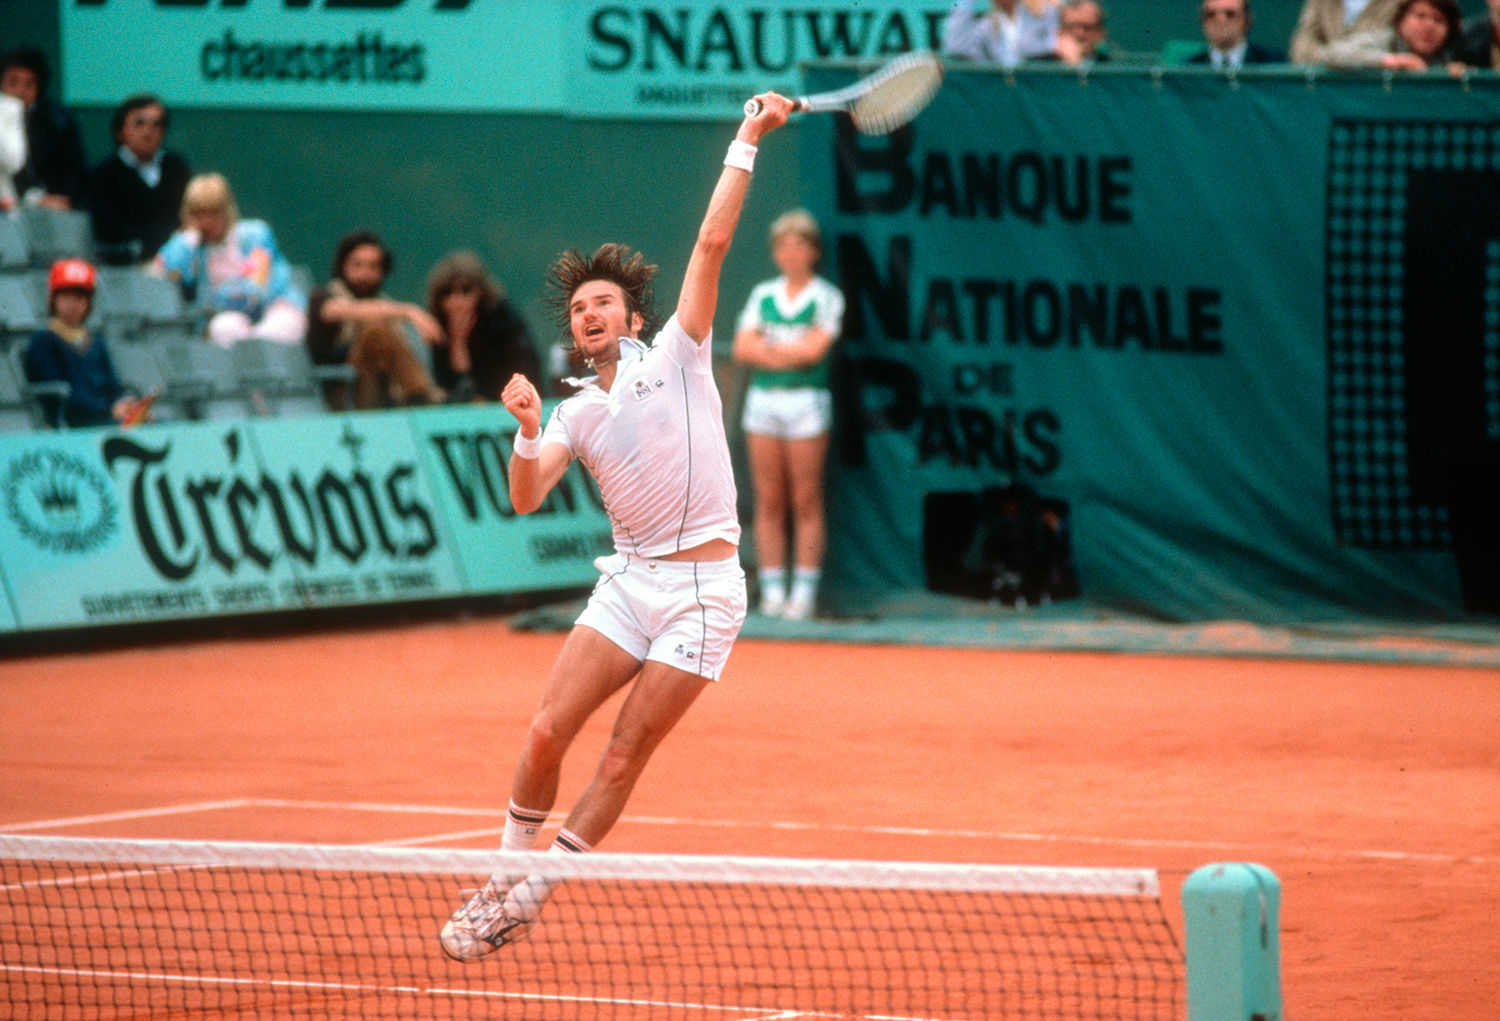 Jimmy Connors, French Open, 1981 : Historical Tennis  : Photography by Adam Stoltman: Sports Photography, The Arts, Portraiture, Travel, Photojournalism and Fine Art in New York